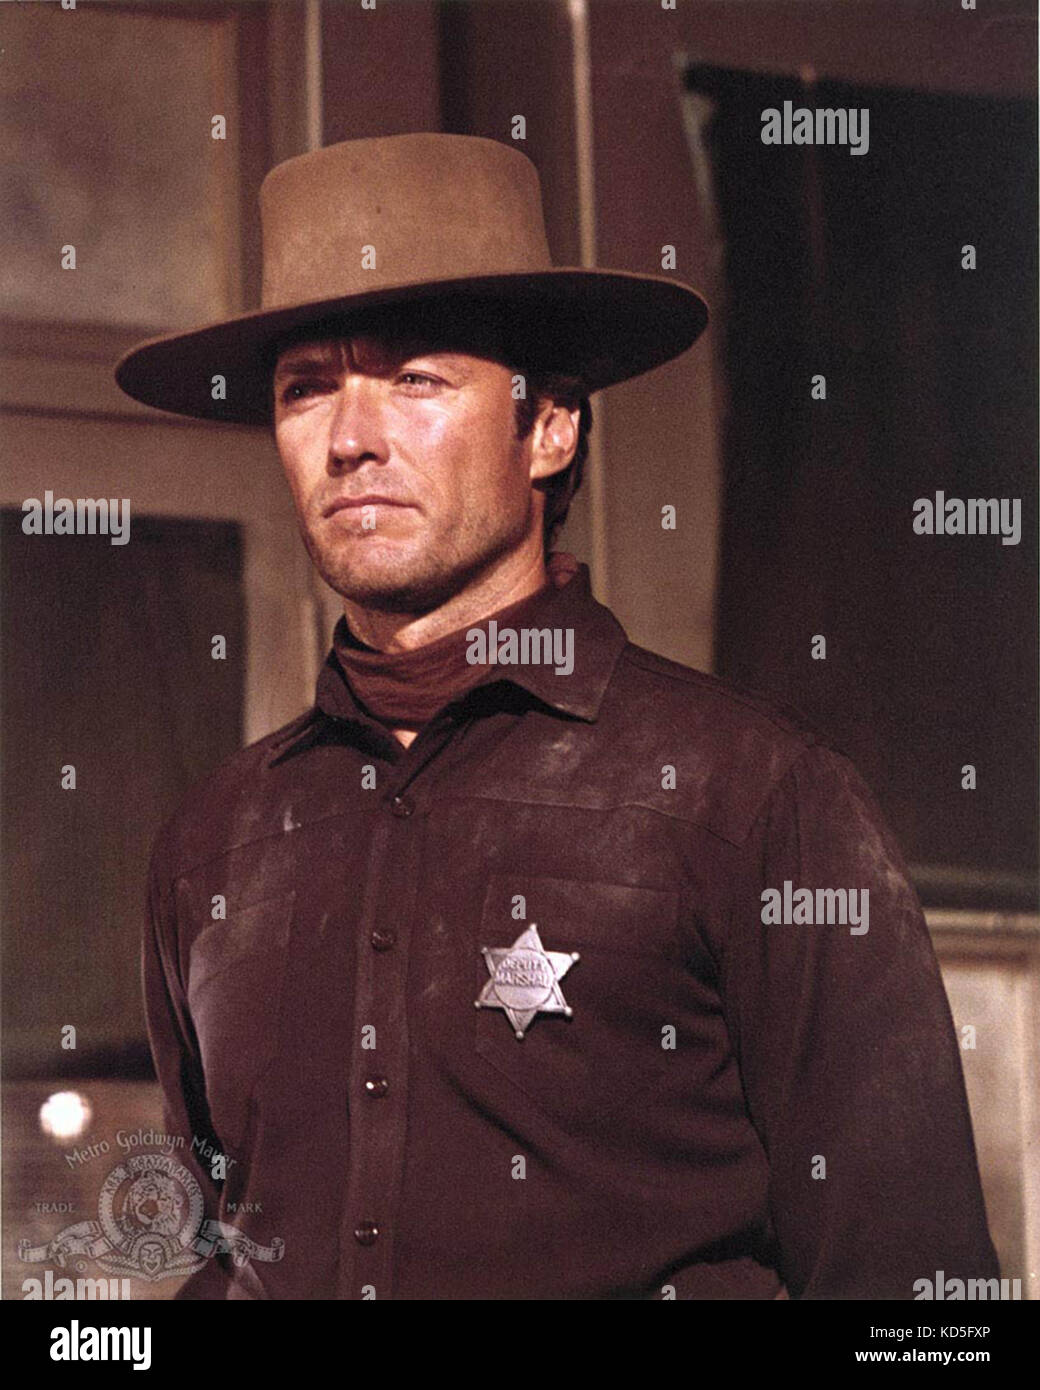 HANG 'EM HIGH (1968) CLINT EASTWOOD TED POST (DIR) MGM/MOVIESTORE COLLECTION LTD Banque D'Images